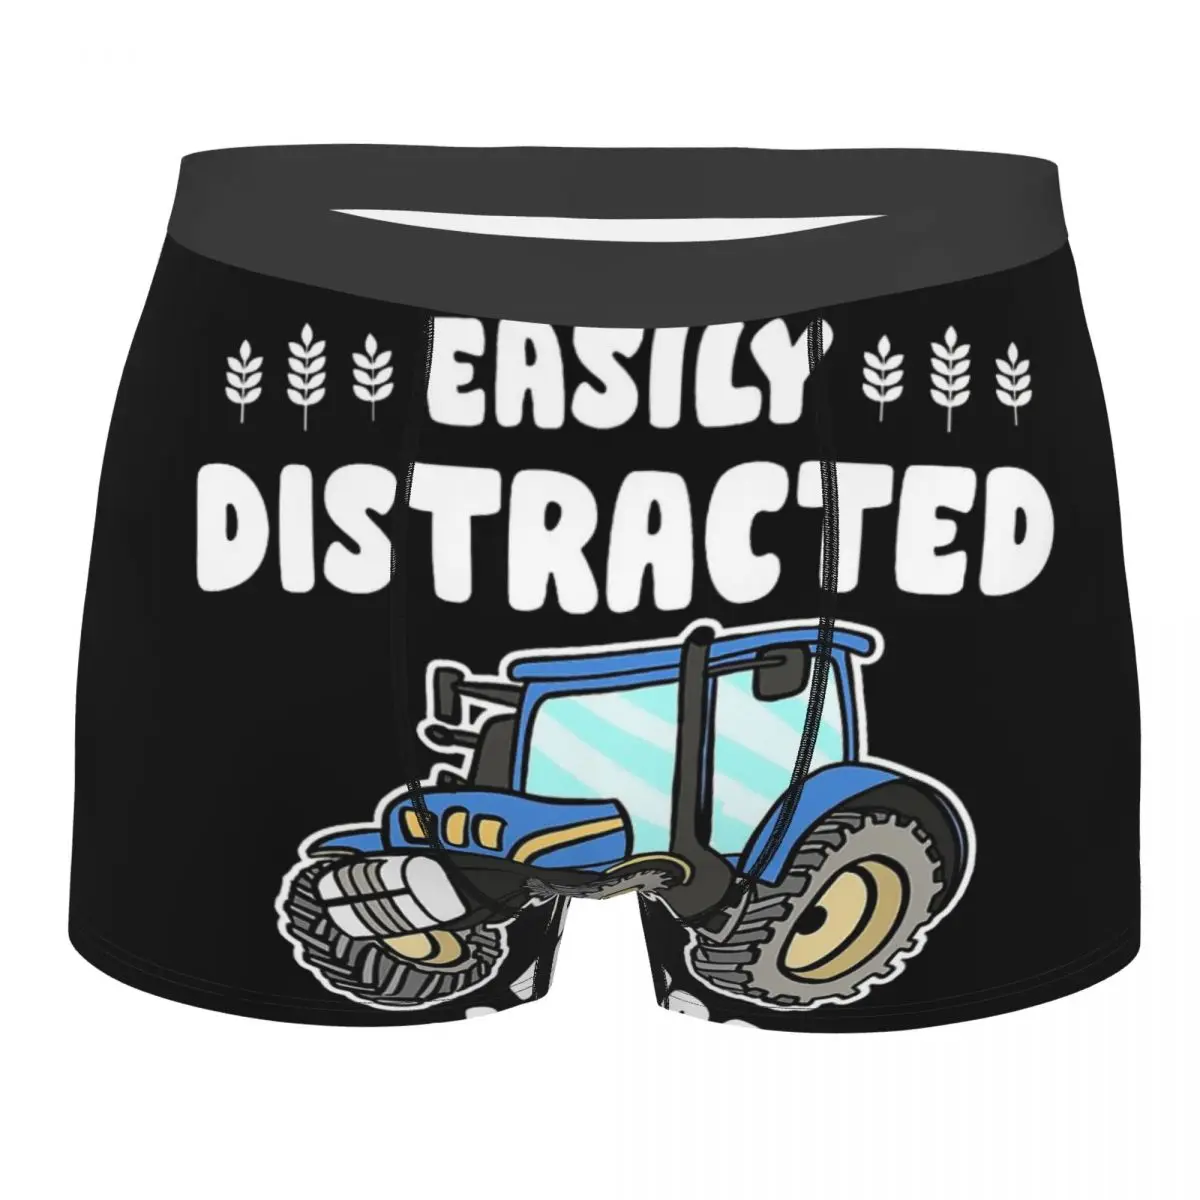 blue Tractors Gift Men Boxer Briefs Underpants Highly Breathable Top Quality Birthday Gifts